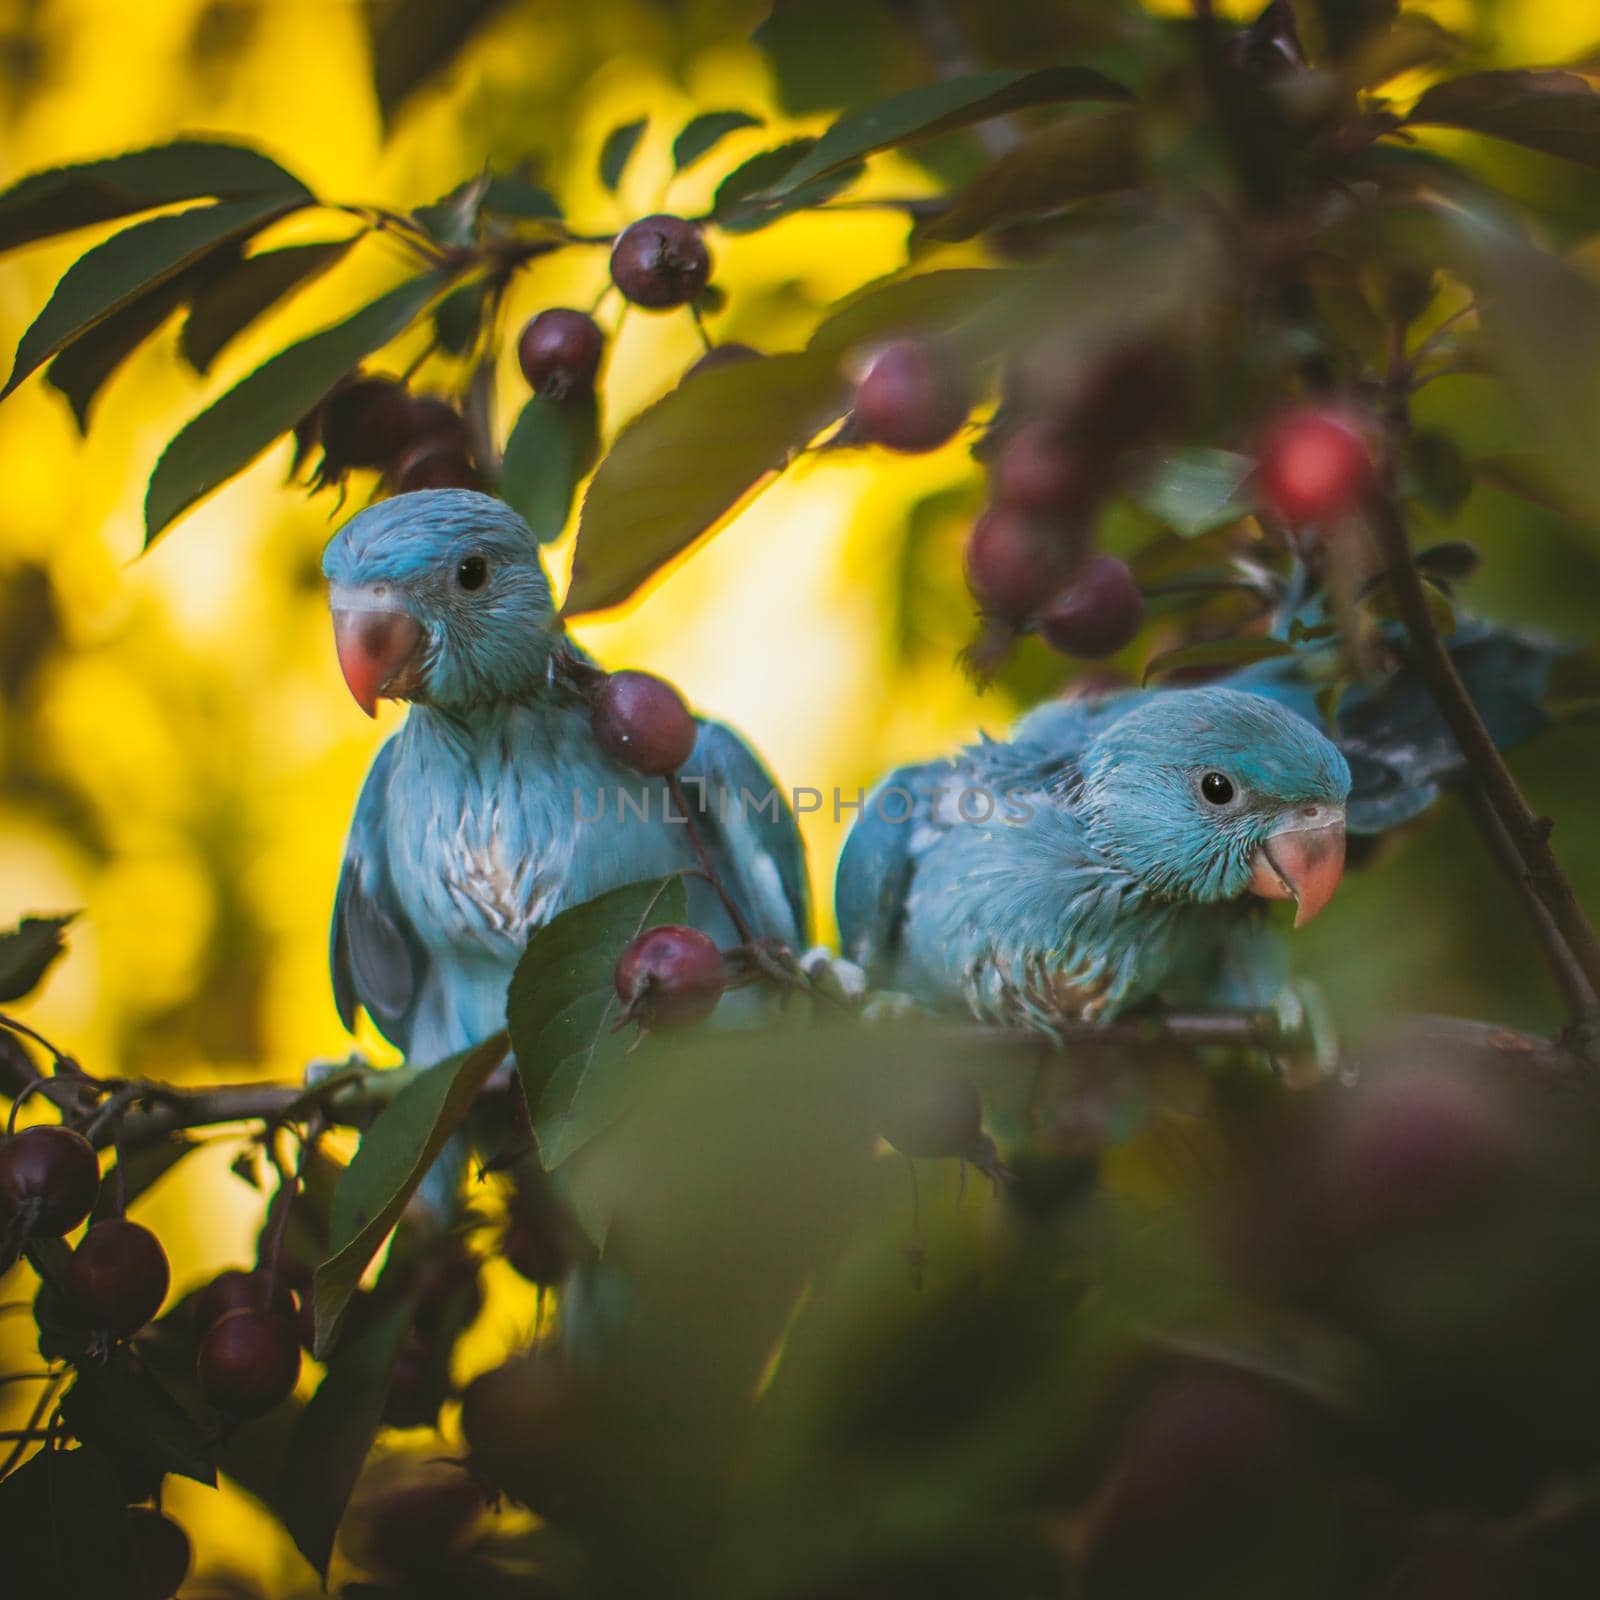 Two blue rose-ringed or ring-necked parakeets on the branch in summer garden by RosaJay